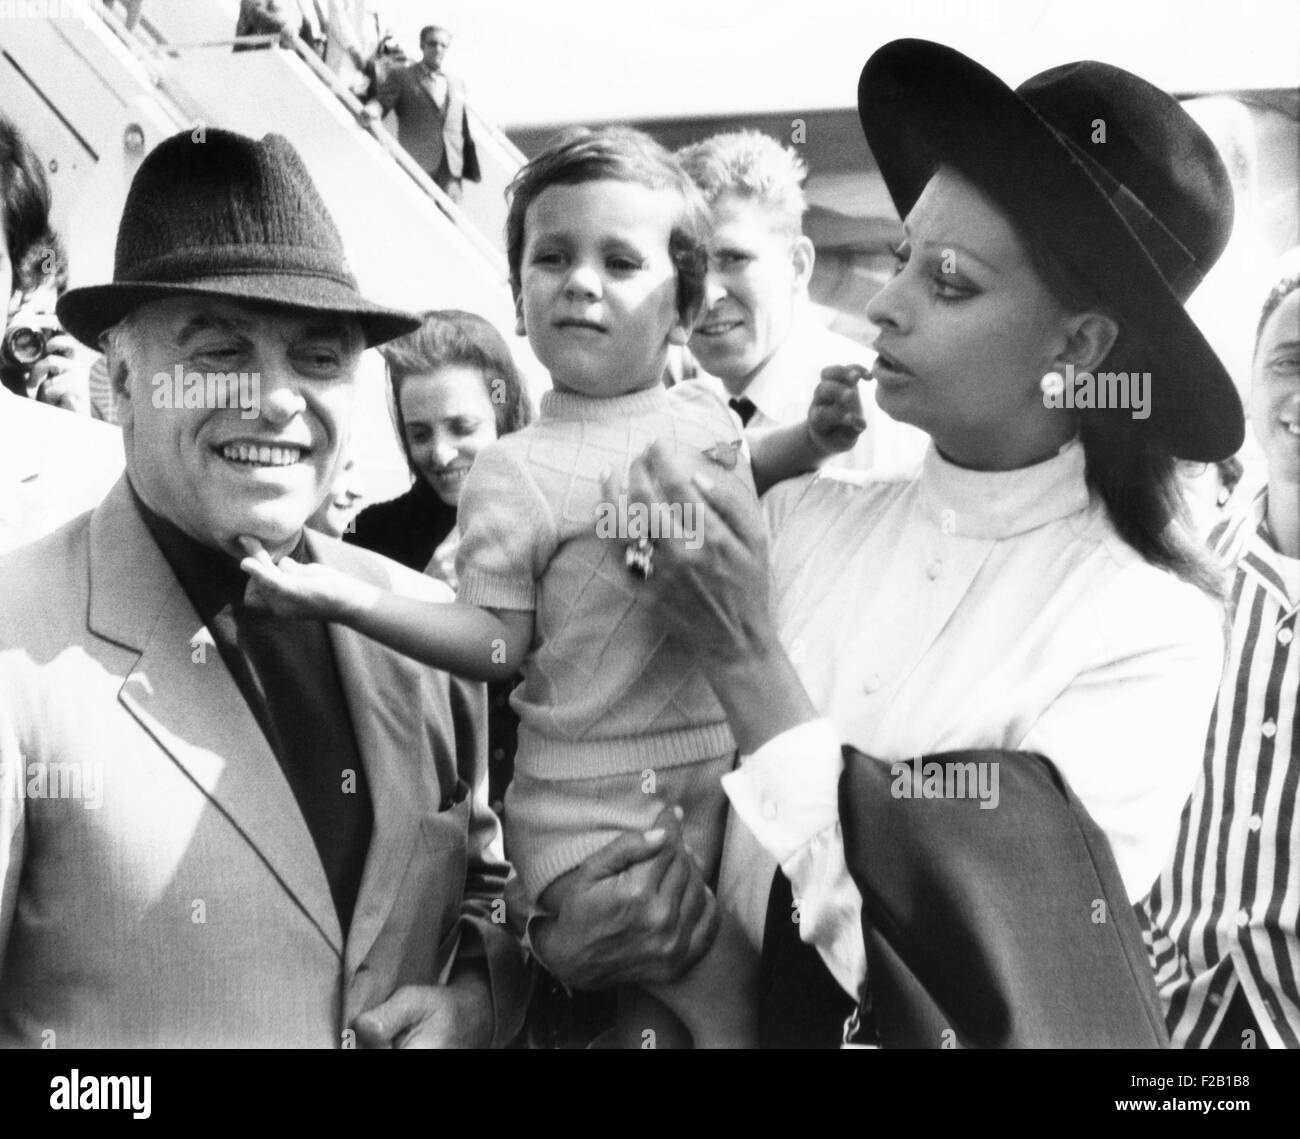 Carlo Ponti, Jr. arrives in New York with his famous parents: Italian film producer, Carlo Ponti Sr., and actress Sophia Loren. Stock Photo